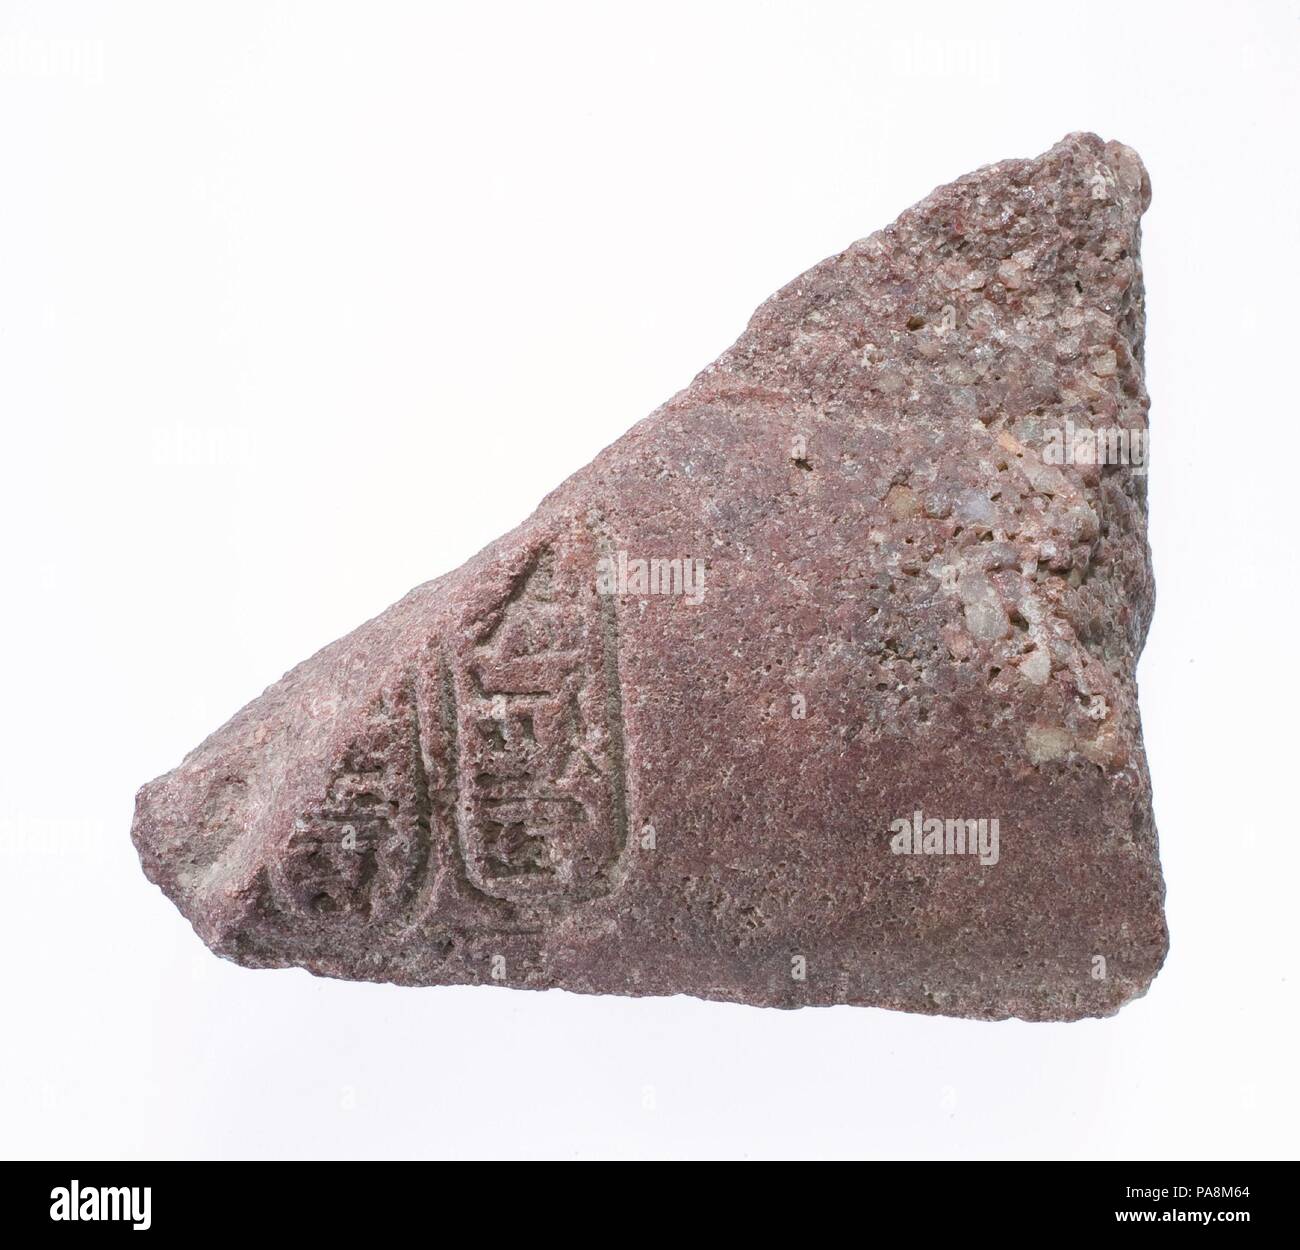 Upraised arm from offering scene with Aten cartouches. Dimensions: H. 8.5 × W. 9.7 × D. 3.2 cm (3 3/8 × 3 13/16 × 1 1/4 in.); arm between incise lines: W. 5.3 cm (2 1/16 in.); cartouche: W. 1.6 cm (5/8 in.). Dynasty: Dynasty 18. Reign: reign of Akhenaten. Date: ca. 1353-1336 B.C.. Museum: Metropolitan Museum of Art, New York, USA. Stock Photo